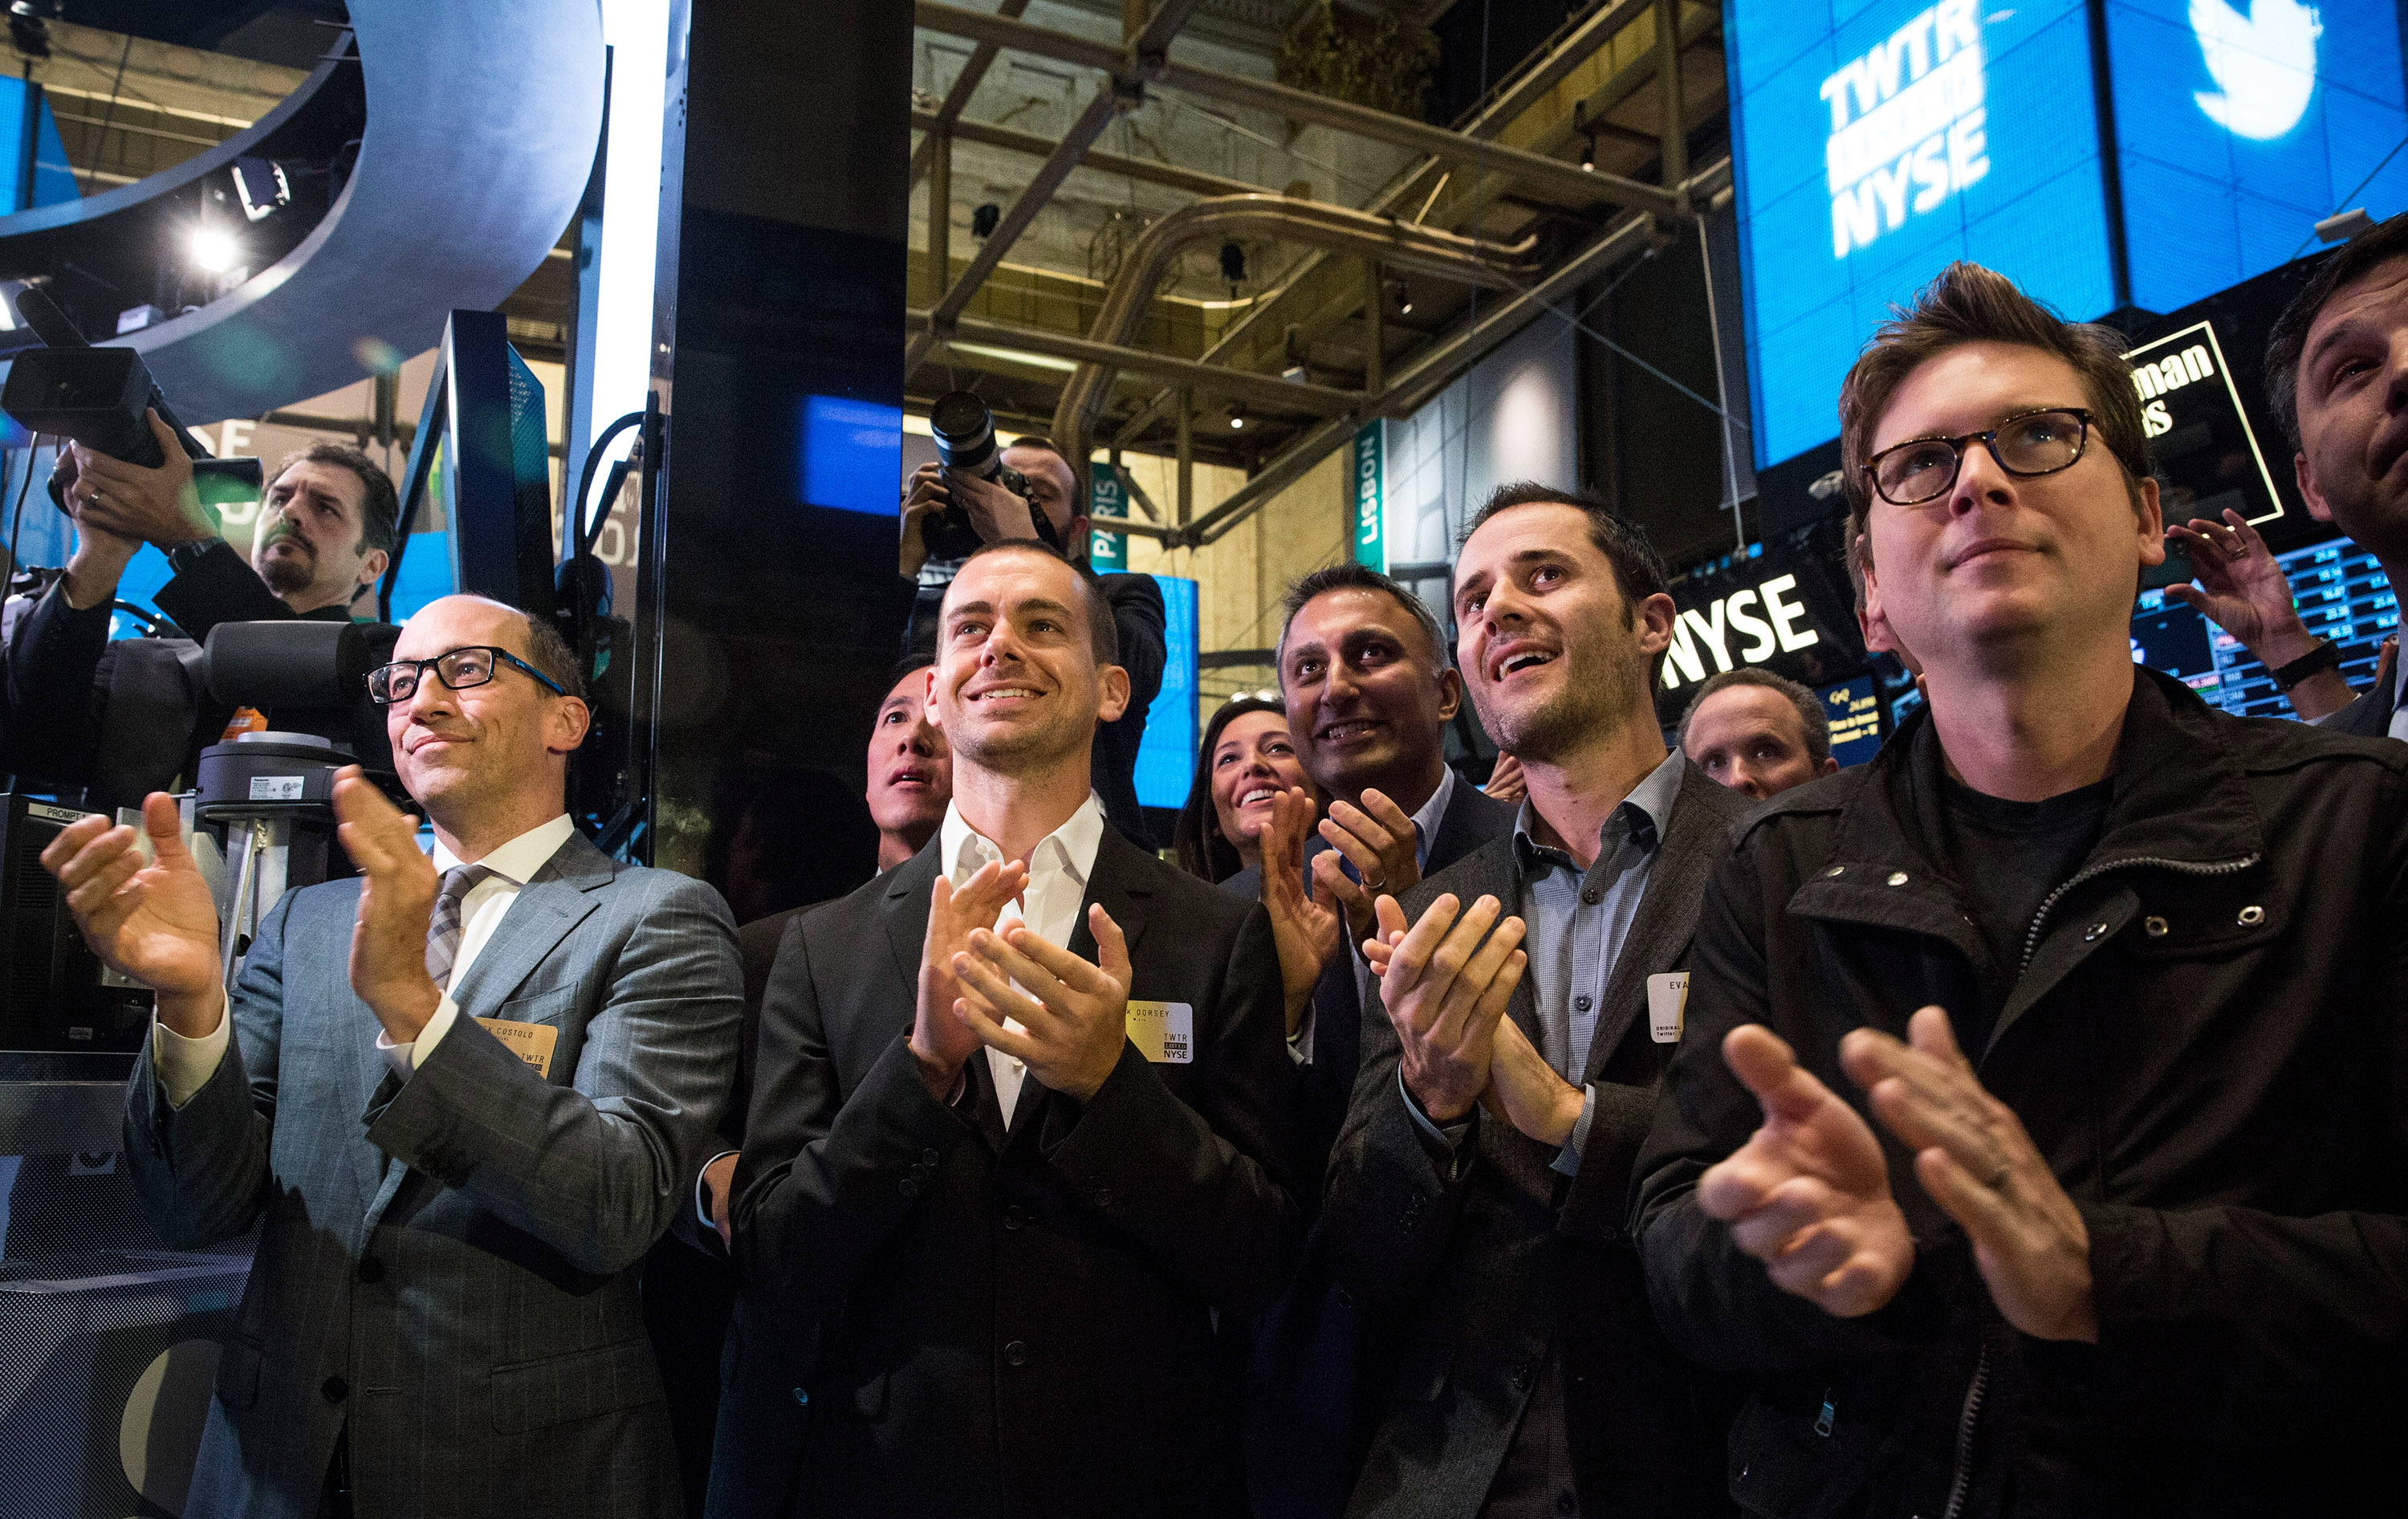 (L-R) Twitter CEO Dick Costolo, Twitter co-founder Jack Dorsey, Twitter co-founder Evan Williams and Twitter co-founder Biz Stone applaud as Twitter rings the opening bell at the New York Stock Exchange (NYSE) while also celebrating the company's IPO on November 7, 2013 in New York City. (Andrew Burton—Getty Images)